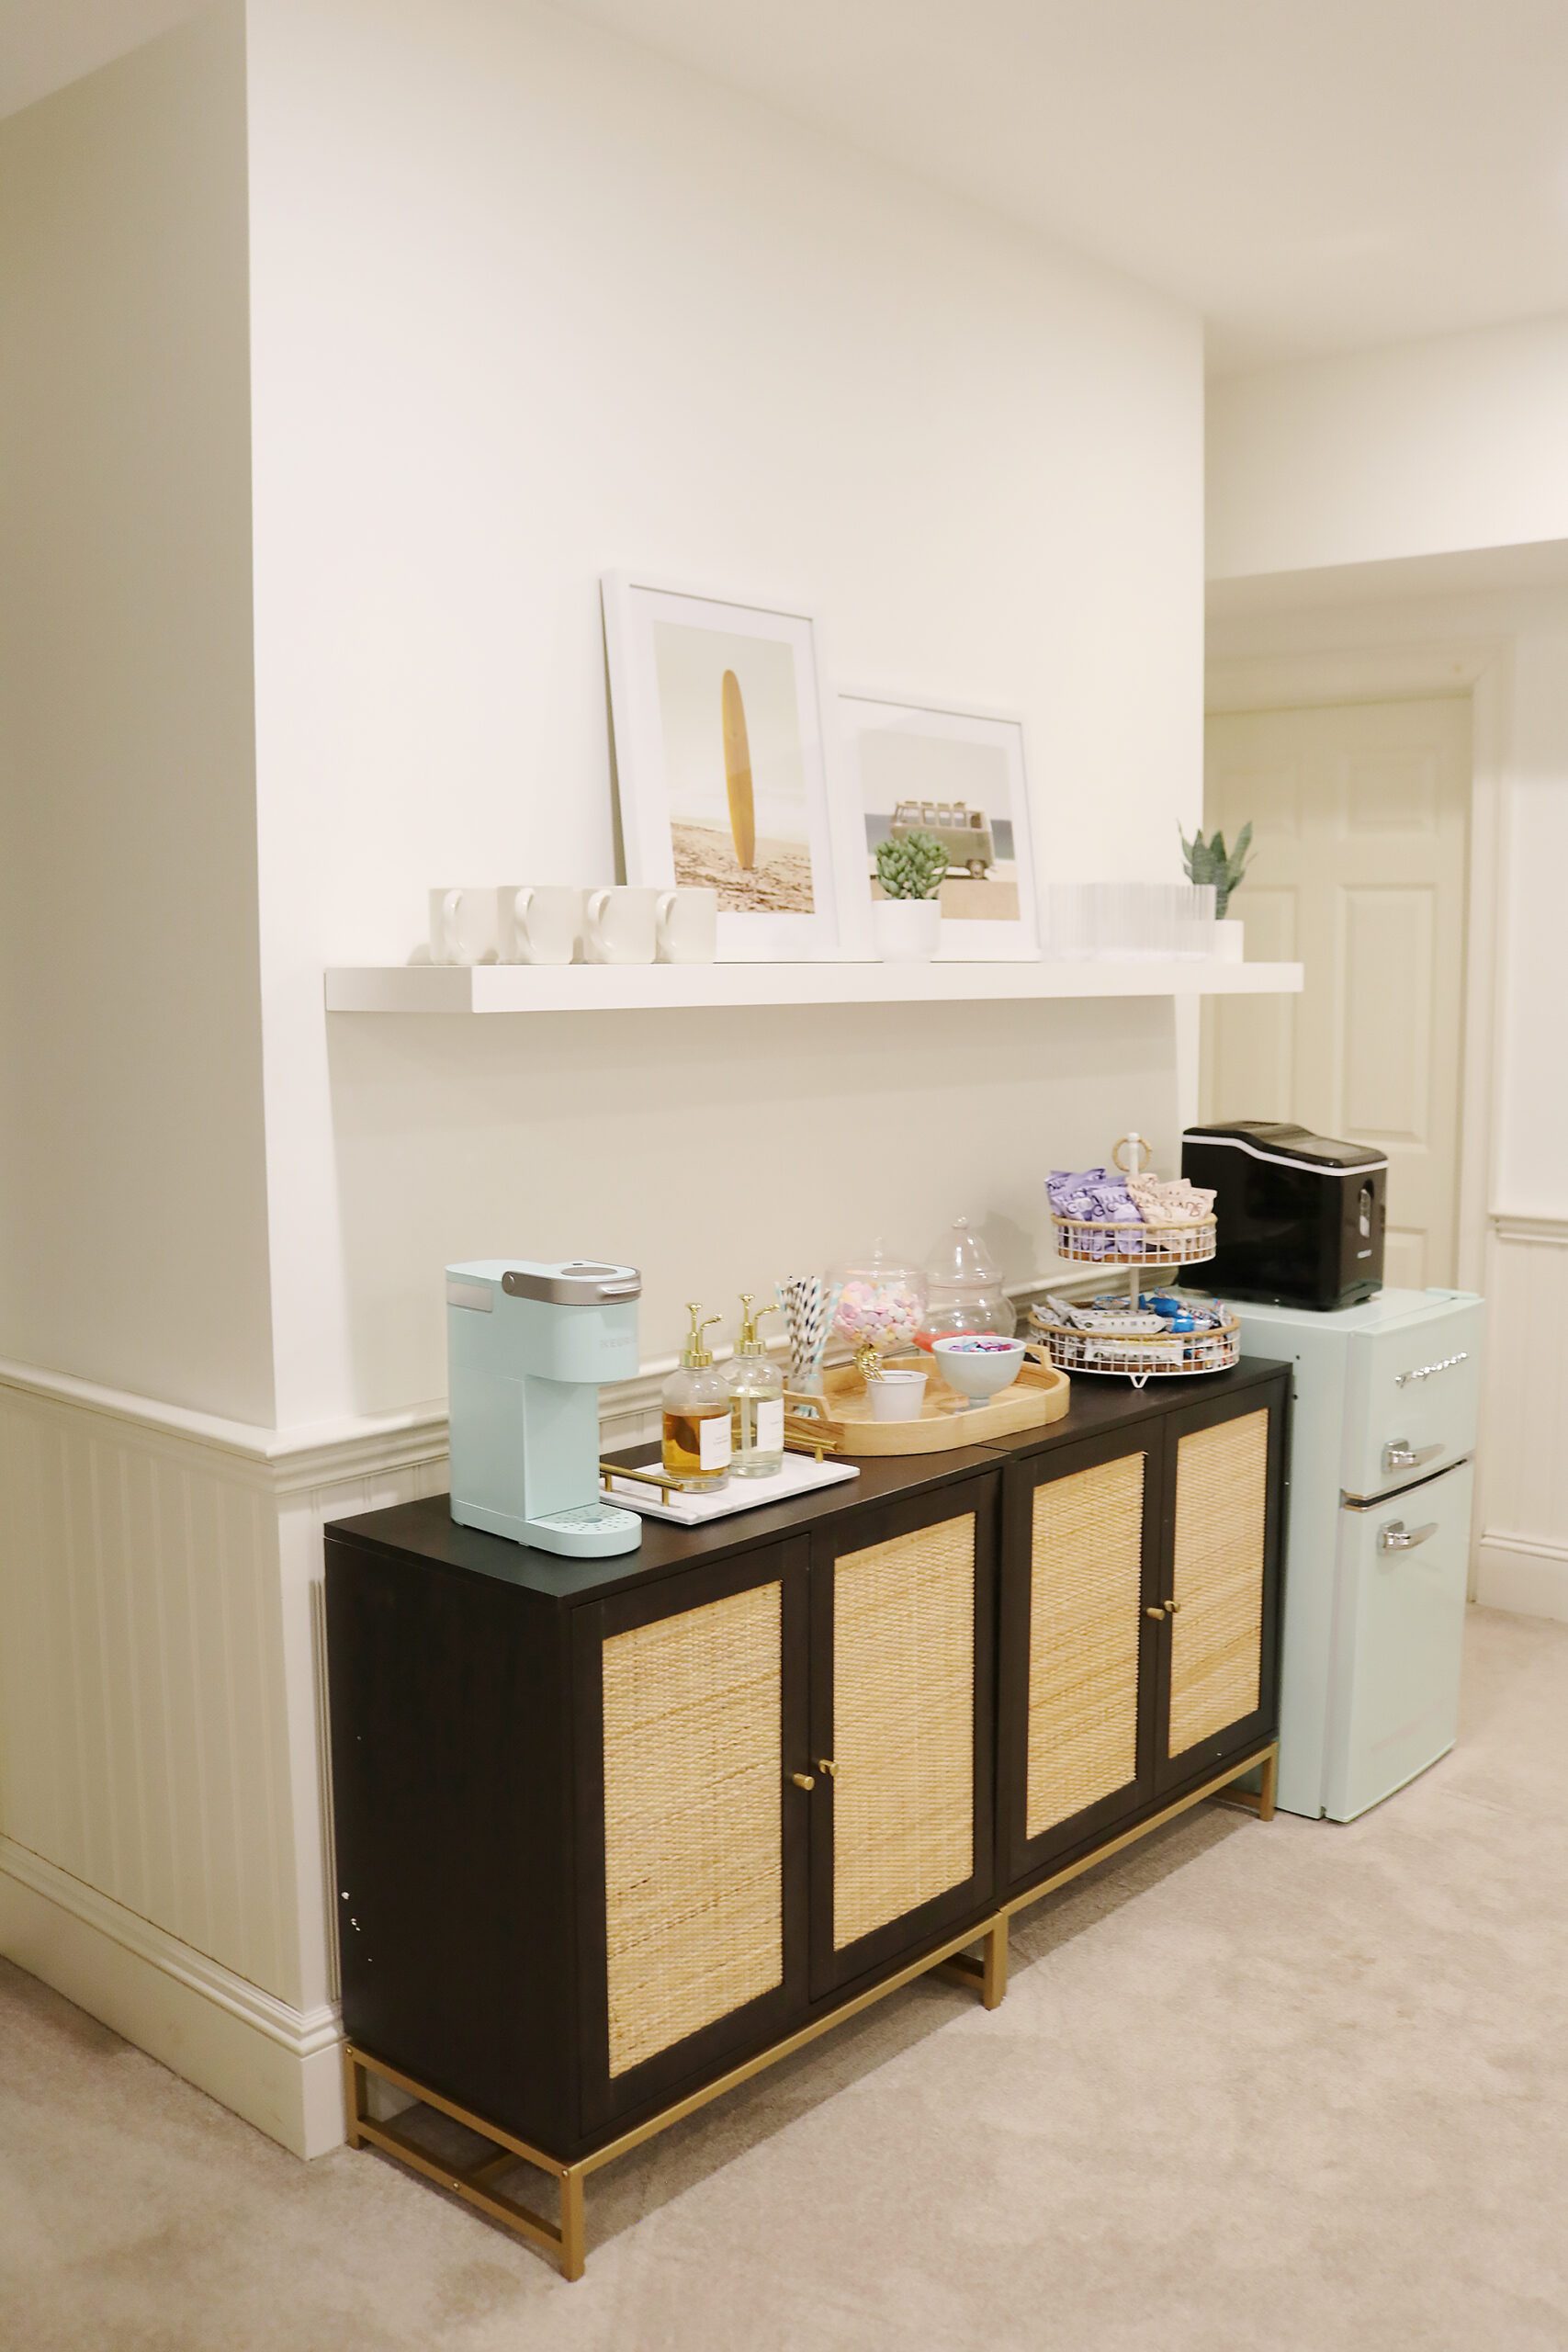 Basement bar ideas on a budget. Easy to do basement mini bar for a makeover.  Easy to add a mini bar with fridge || Darling Darleen Top CT Lifestyle Blogger